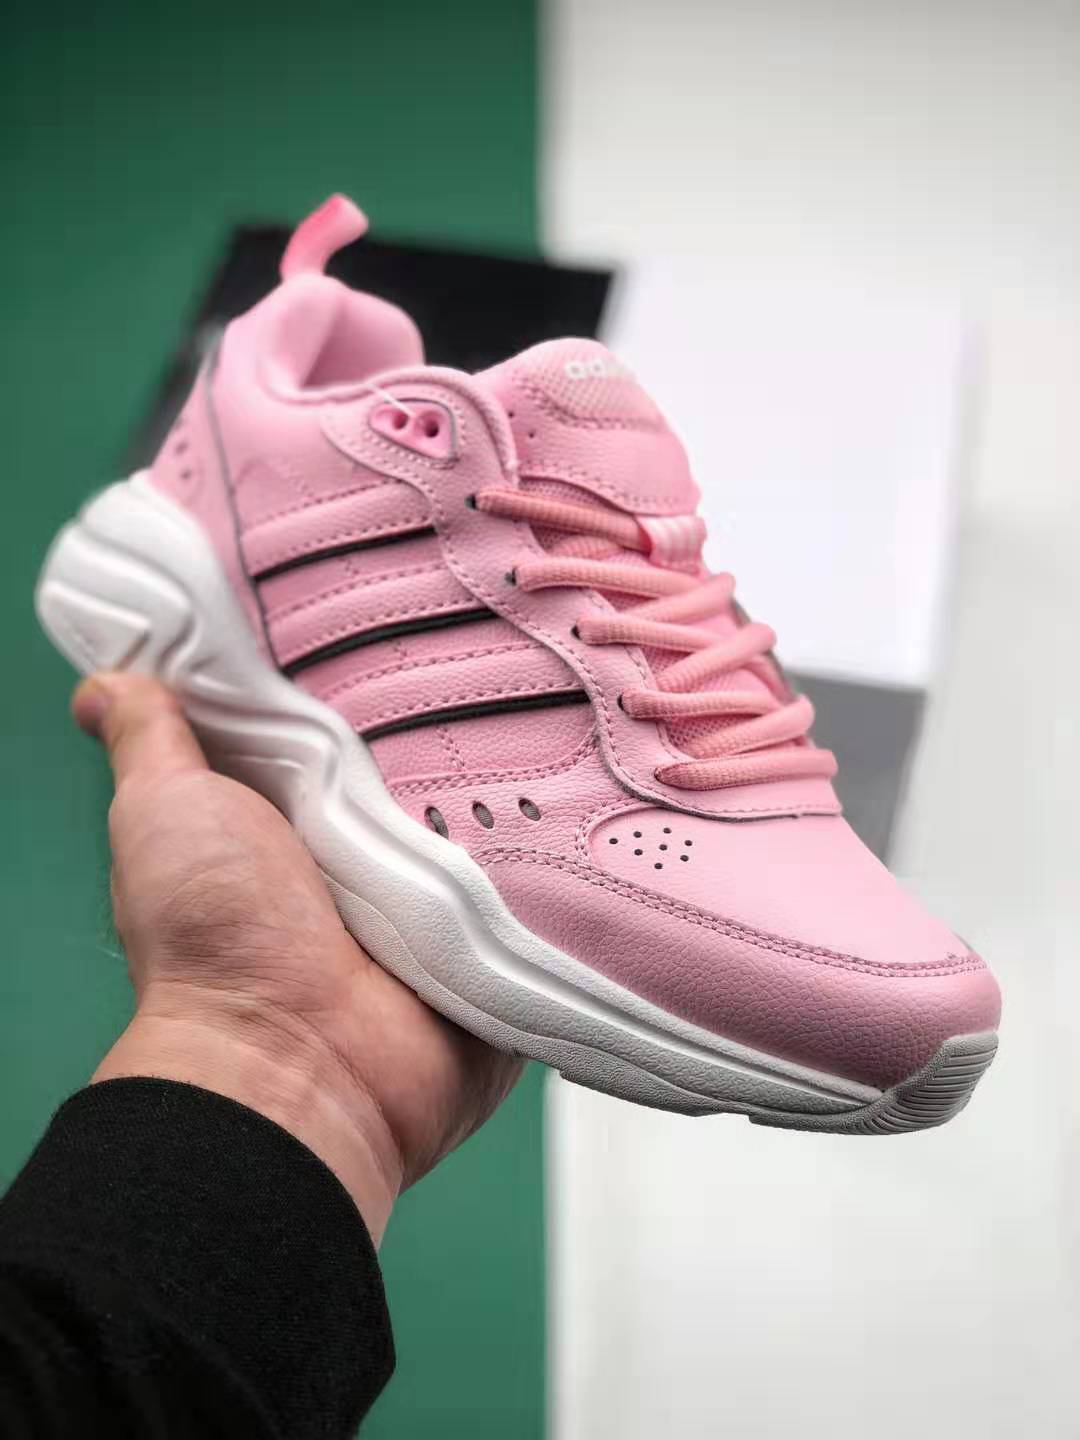 Adidas Neo Strutter Pink White EG6225 - Stylish and comfortable sneakers for women.